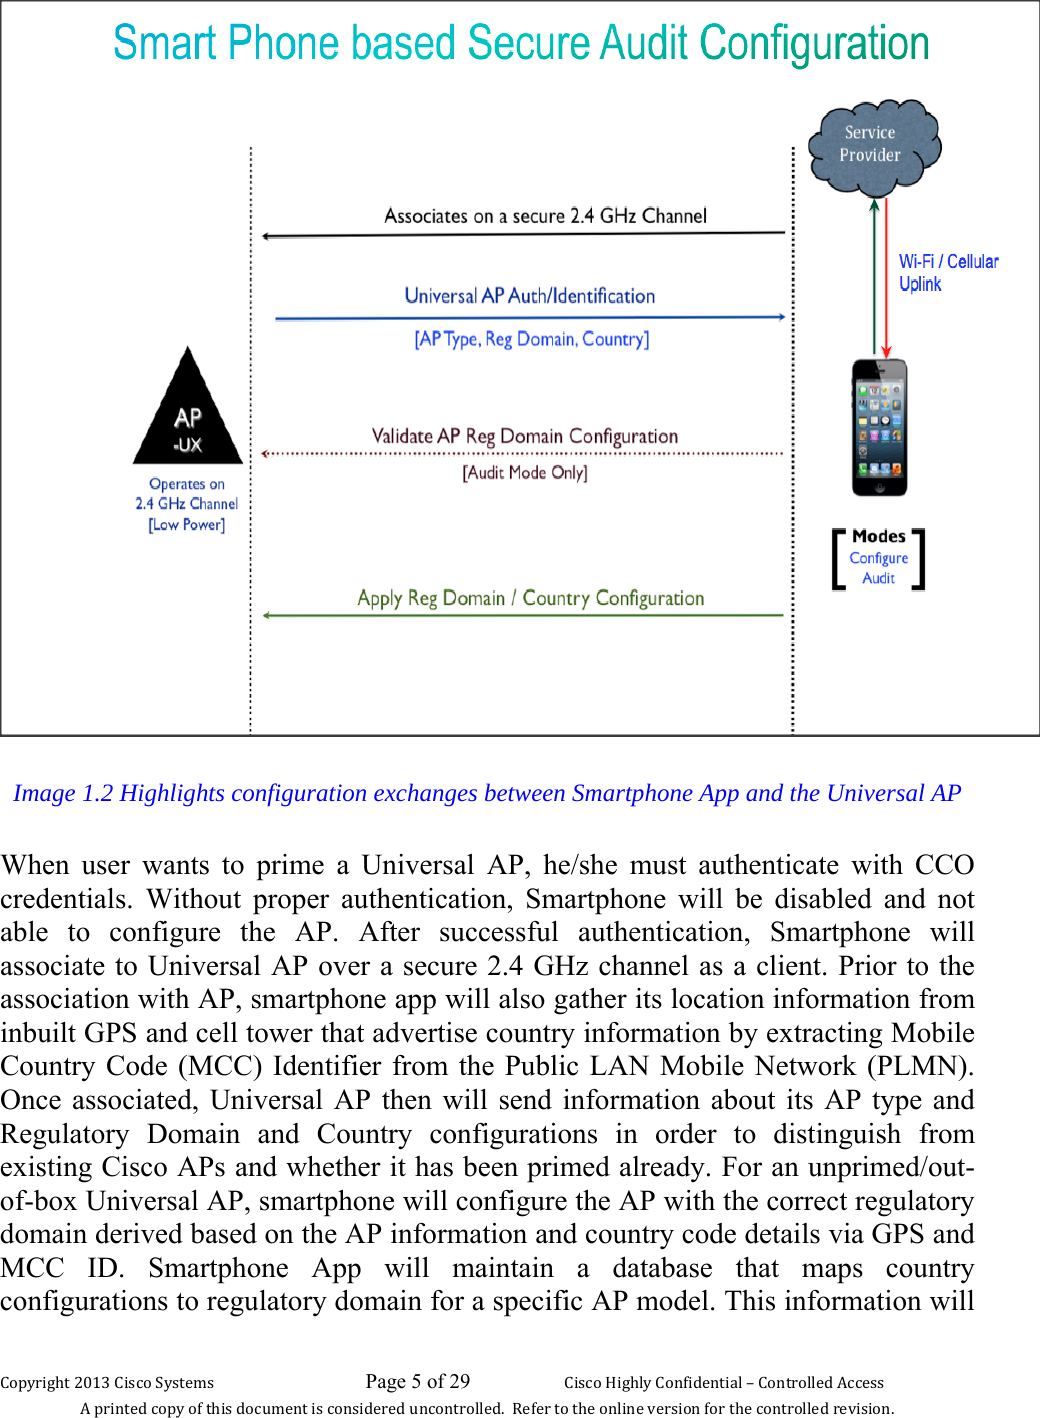 Copyright 2013 Cisco Systems                             Page 5 of 29                     Cisco Highly Confidential – Controlled Access A printed copy of this document is considered uncontrolled.  Refer to the online version for the controlled revision.   Image 1.2 Highlights configuration exchanges between Smartphone App and the Universal AP  When user wants to prime a Universal AP, he/she must authenticate with CCO credentials. Without proper authentication, Smartphone will be disabled and not able to configure the AP. After successful authentication, Smartphone will associate to Universal AP over a secure 2.4 GHz channel as a client. Prior to the association with AP, smartphone app will also gather its location information from inbuilt GPS and cell tower that advertise country information by extracting Mobile Country Code (MCC) Identifier from the Public LAN Mobile Network (PLMN). Once associated, Universal AP then will send information about its AP type and Regulatory Domain and Country configurations in order to distinguish from existing Cisco APs and whether it has been primed already. For an unprimed/out-of-box Universal AP, smartphone will configure the AP with the correct regulatory domain derived based on the AP information and country code details via GPS and MCC ID. Smartphone App will maintain a database that maps country configurations to regulatory domain for a specific AP model. This information will 